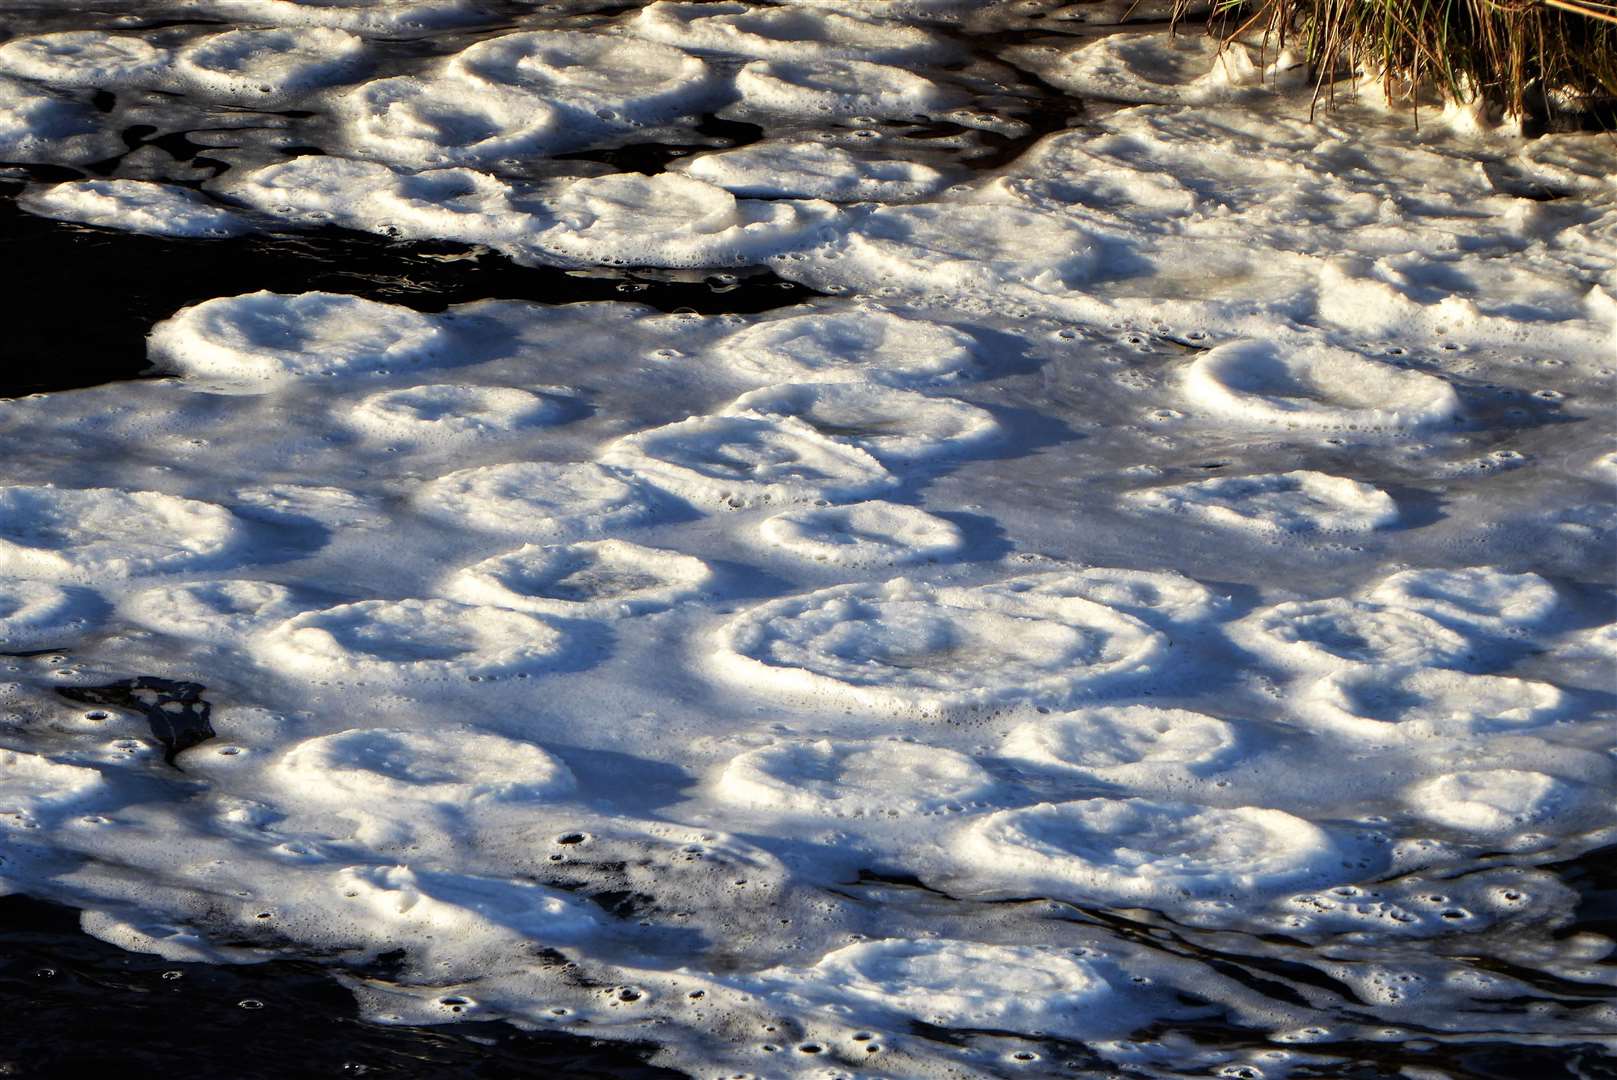 Ice discs form when conditions are just below freezing.